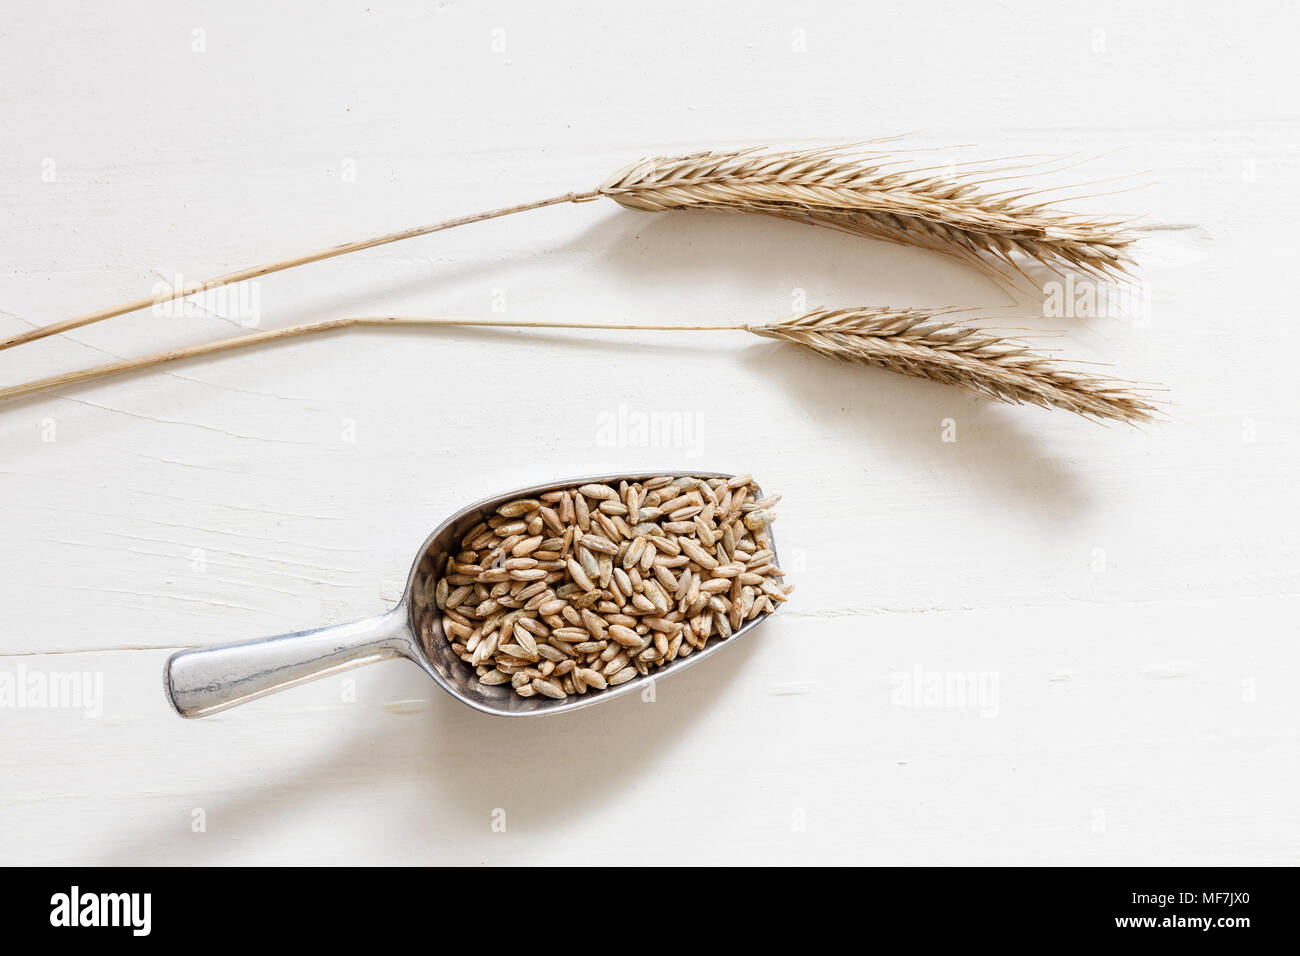 Two rye spikes and shovel of rye grains on light background Stock Photo